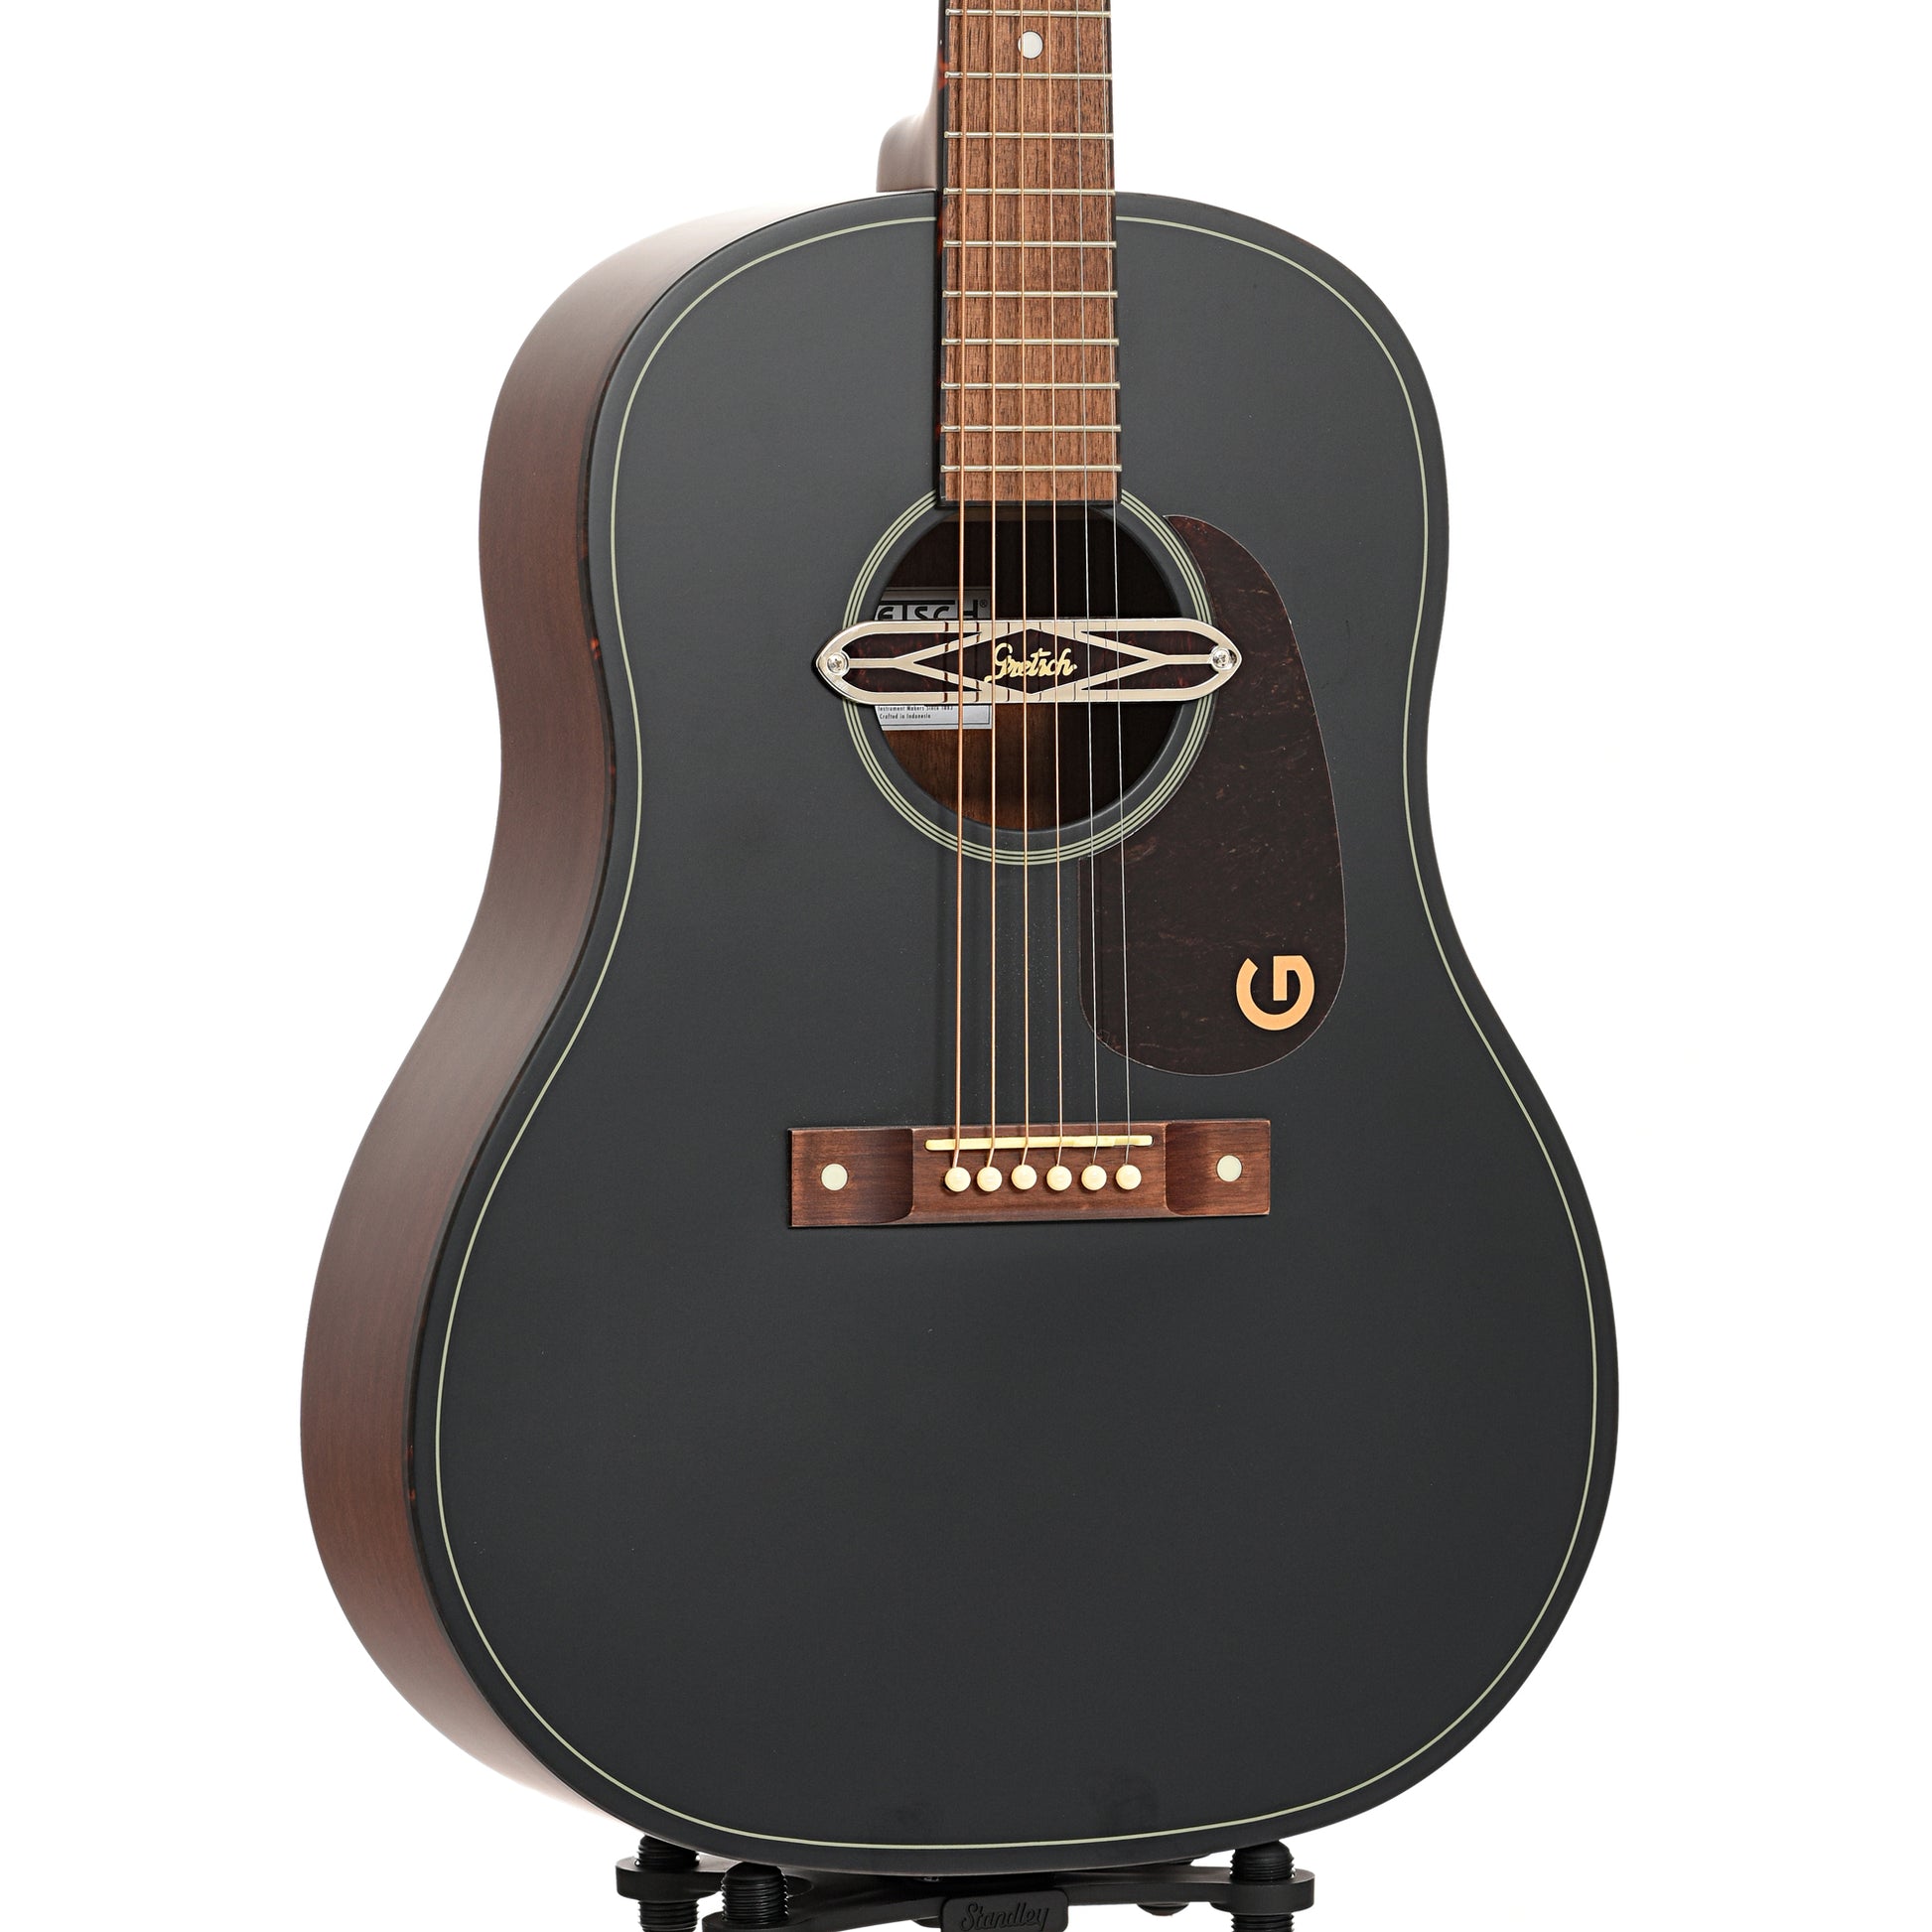 Front and side of Gretsch Jim Dandy Deltoluxe Dreadnought Acoustic/Electric Guitar, Black Top